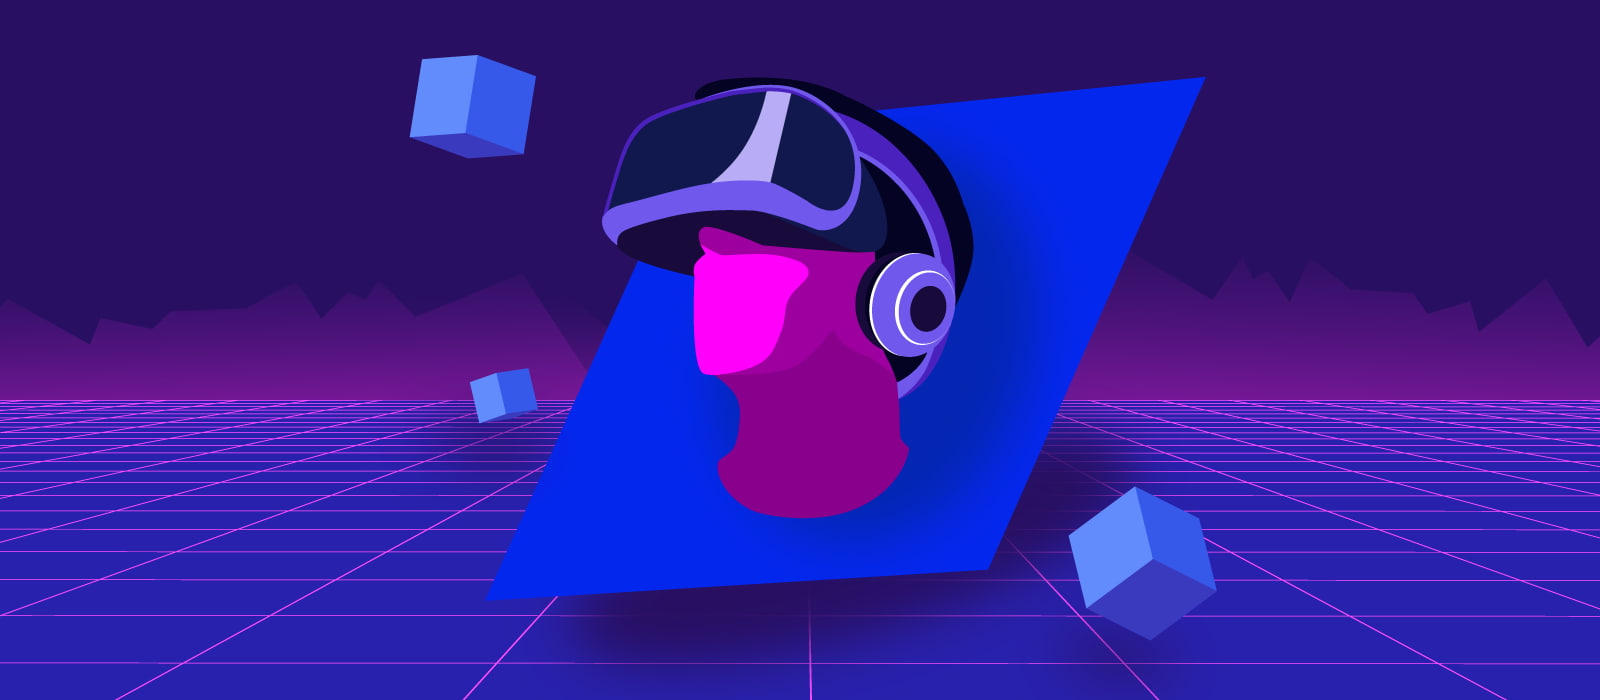 Head with VR glasses on it